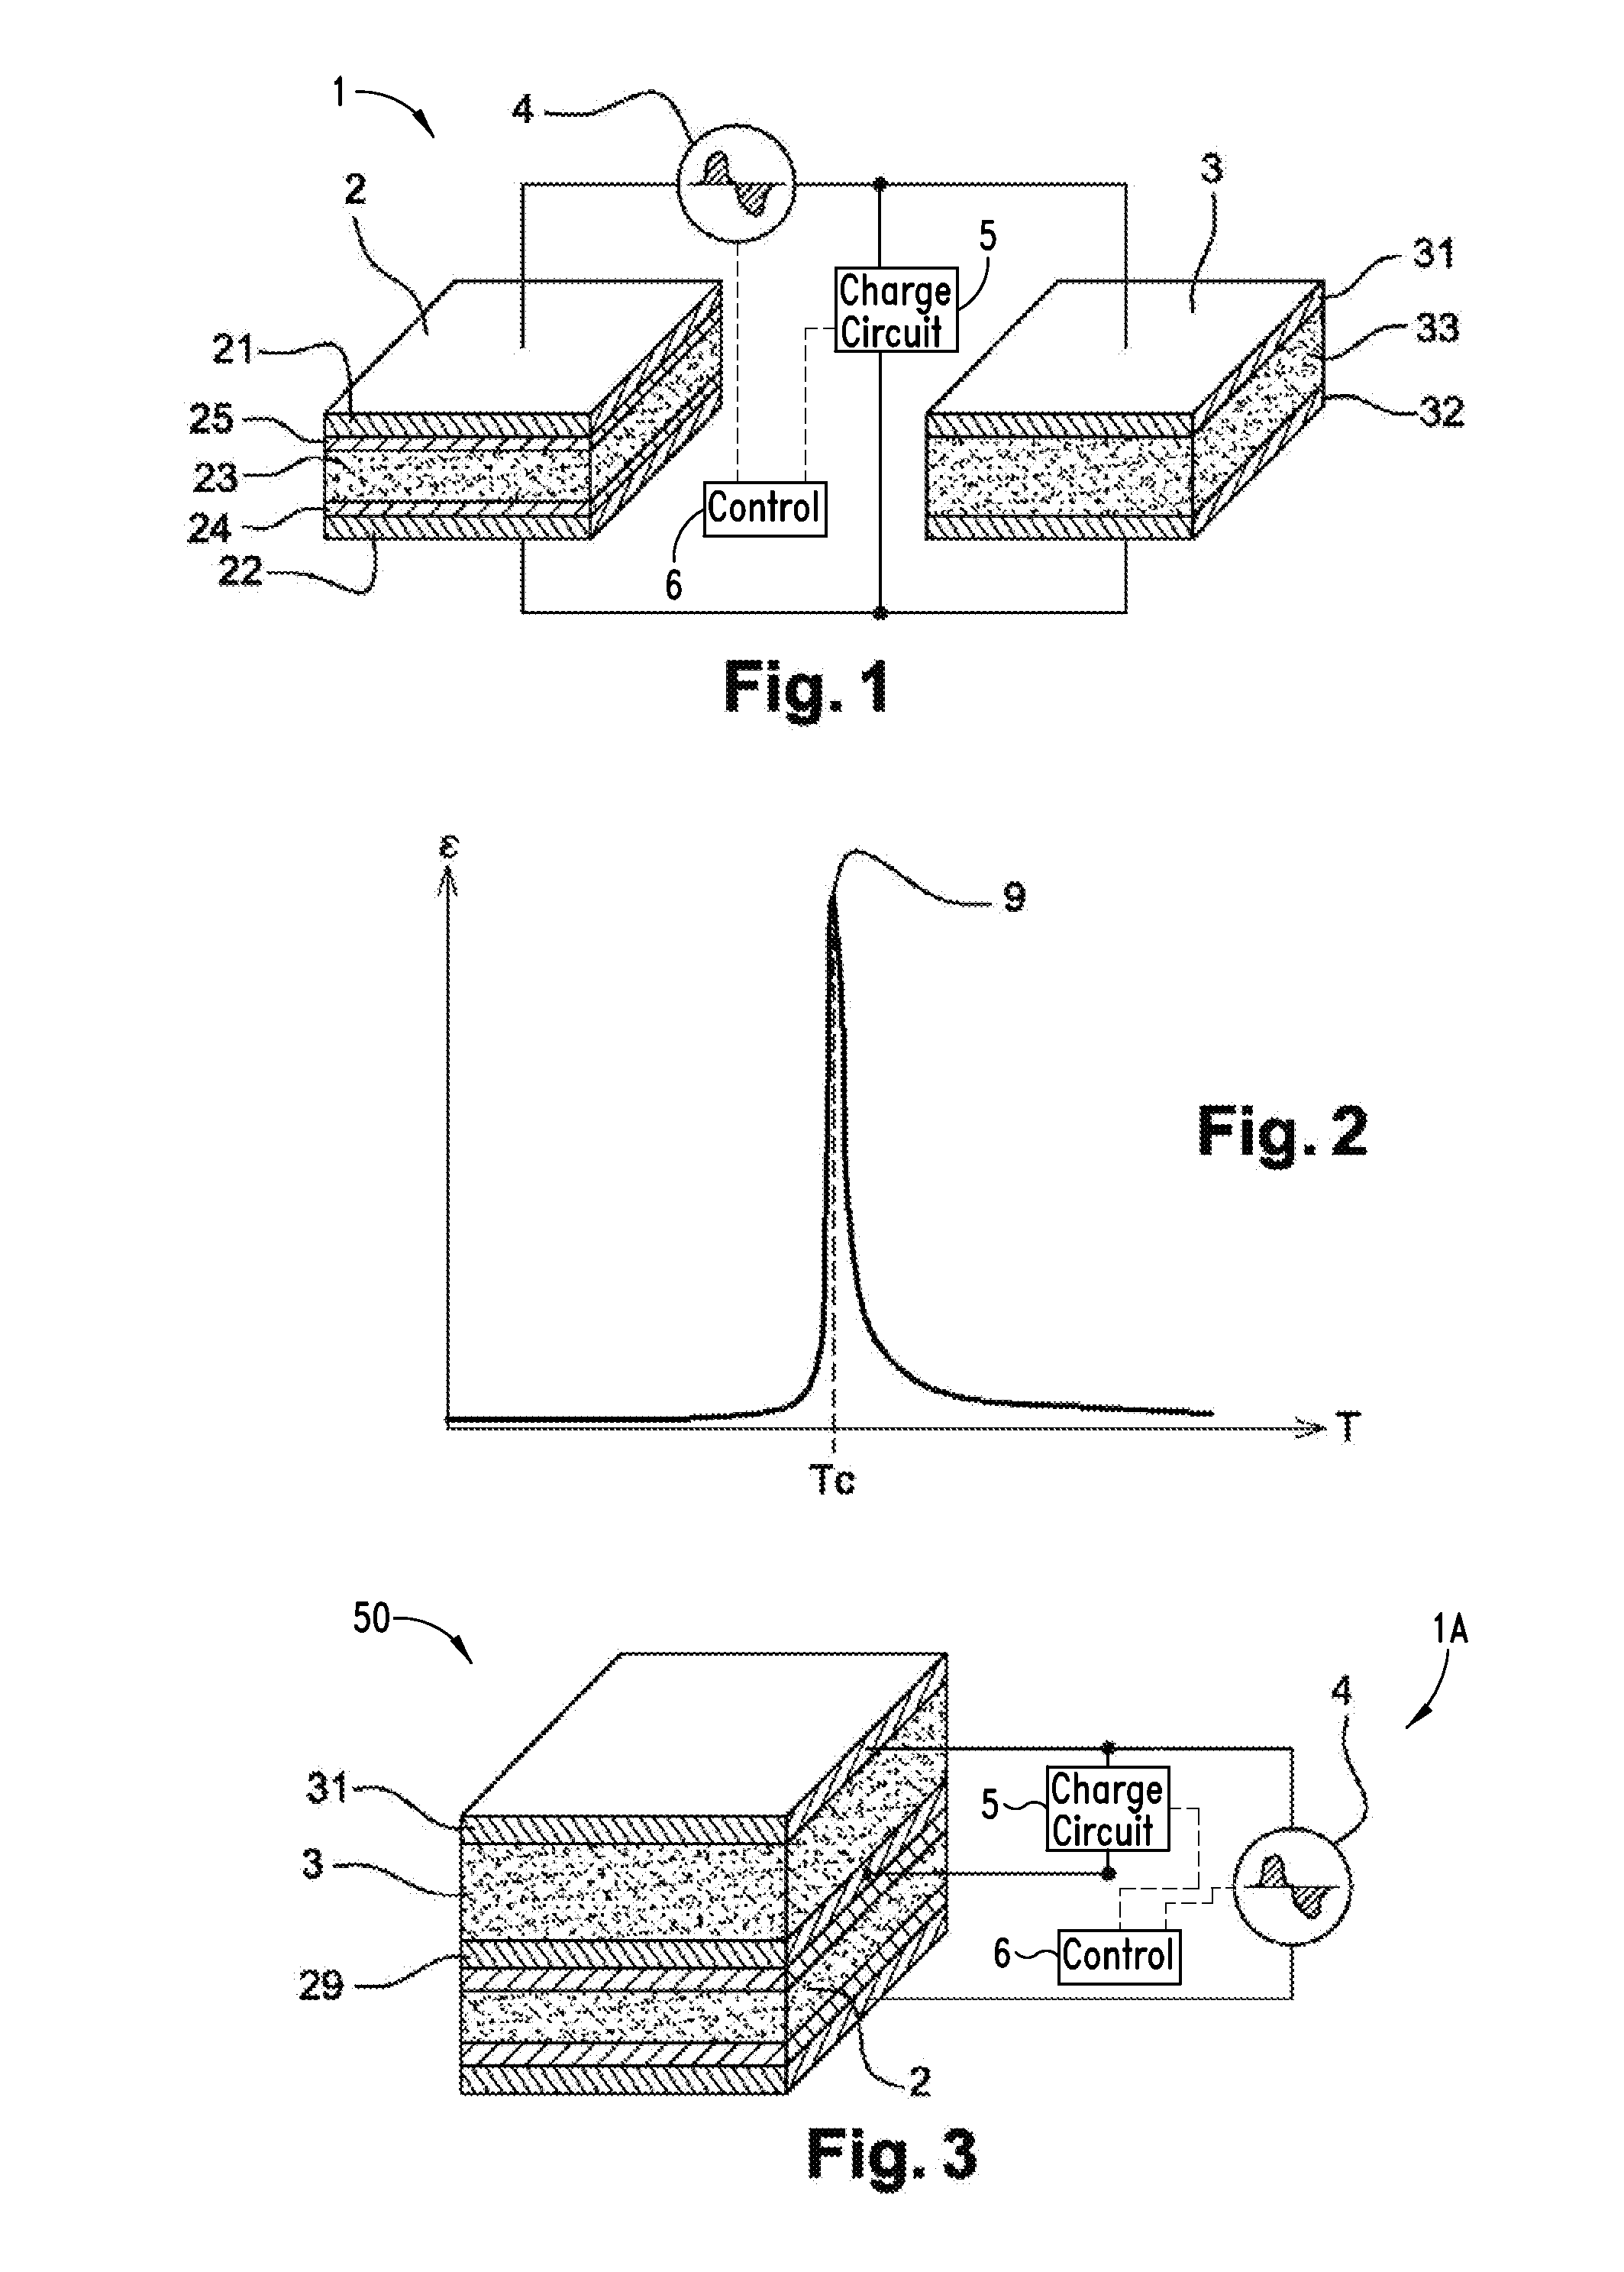 Electrical energy generation device